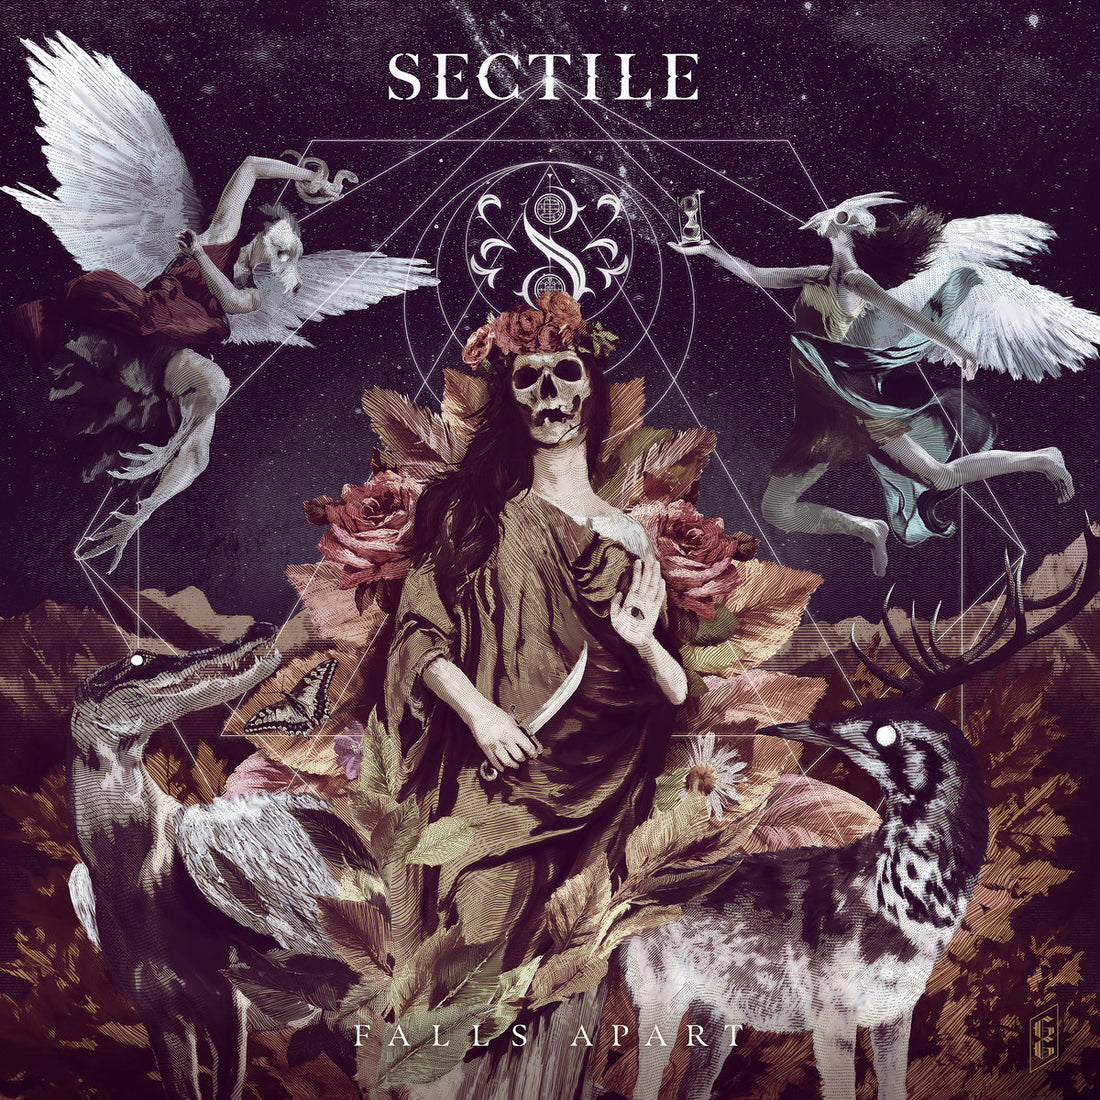 Sectile